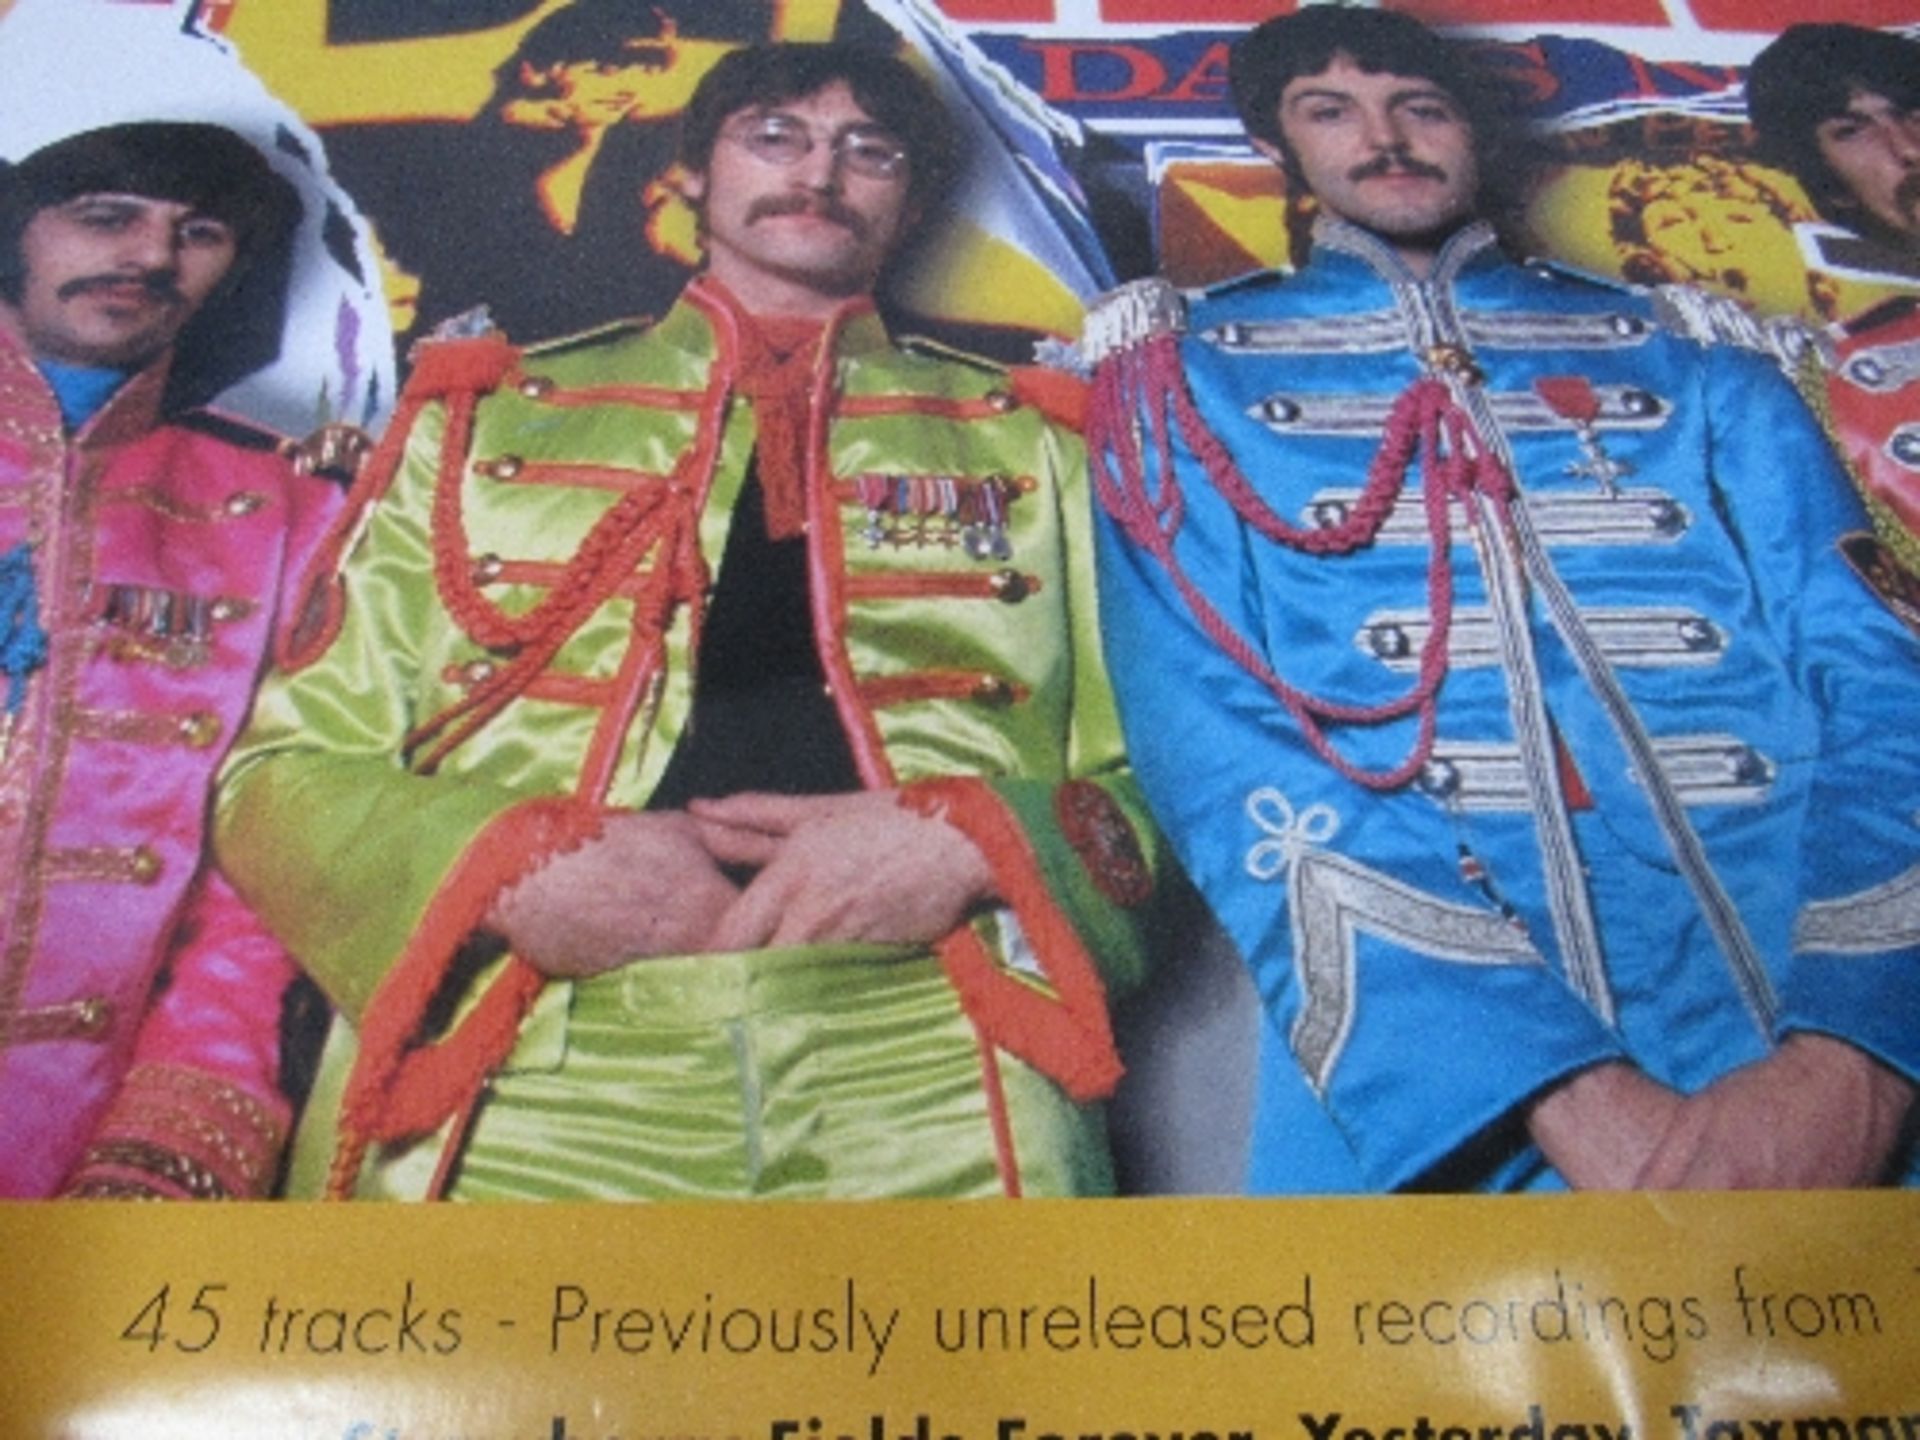 4 Beatles Anthology posters including un-issued Anthology 3 poster. Estimate £20-30. - Image 3 of 5